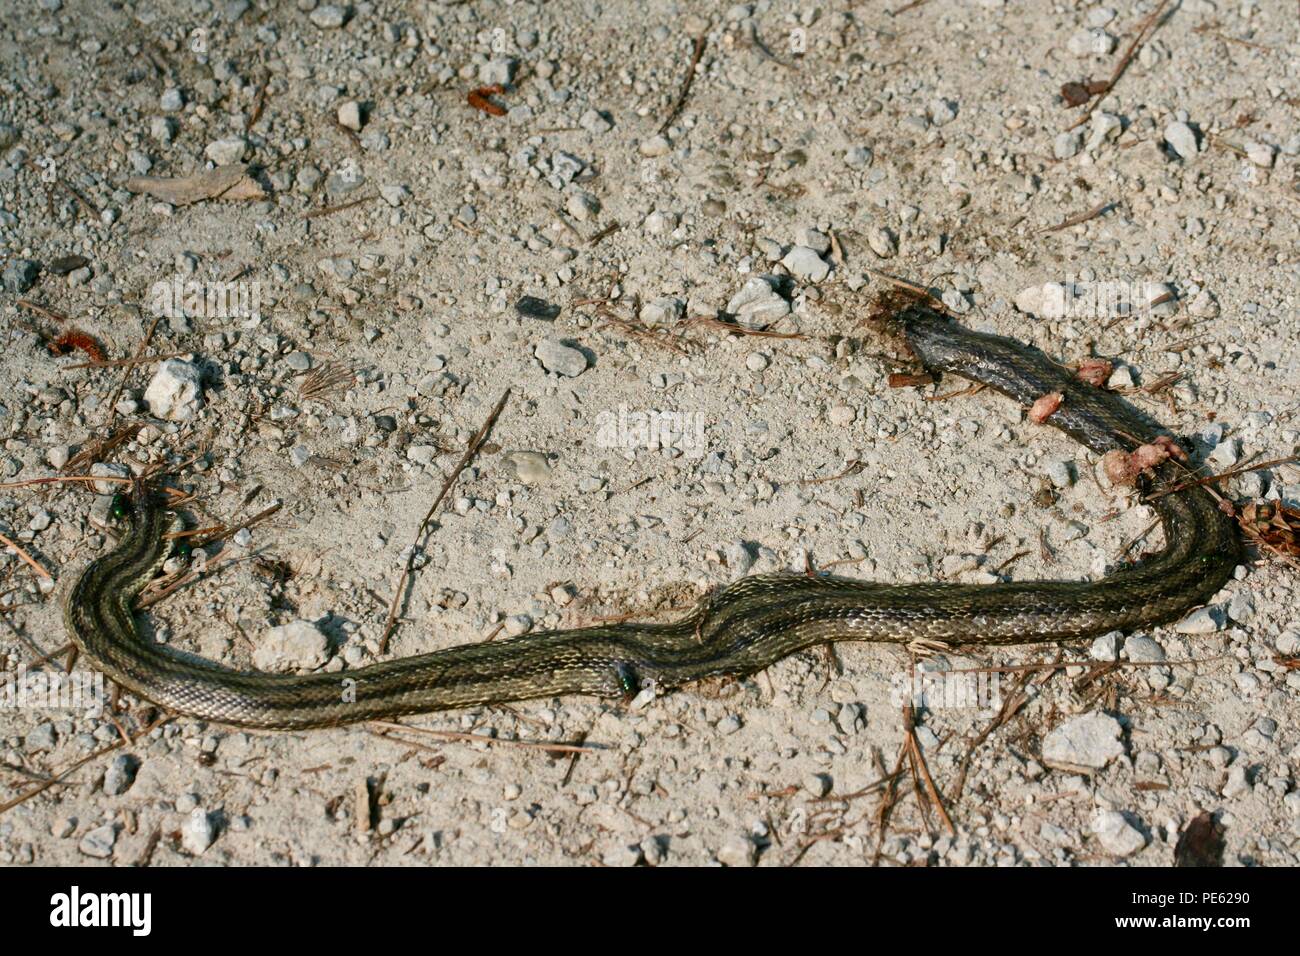 Dead snake on the side of a dirt road Stock Photo